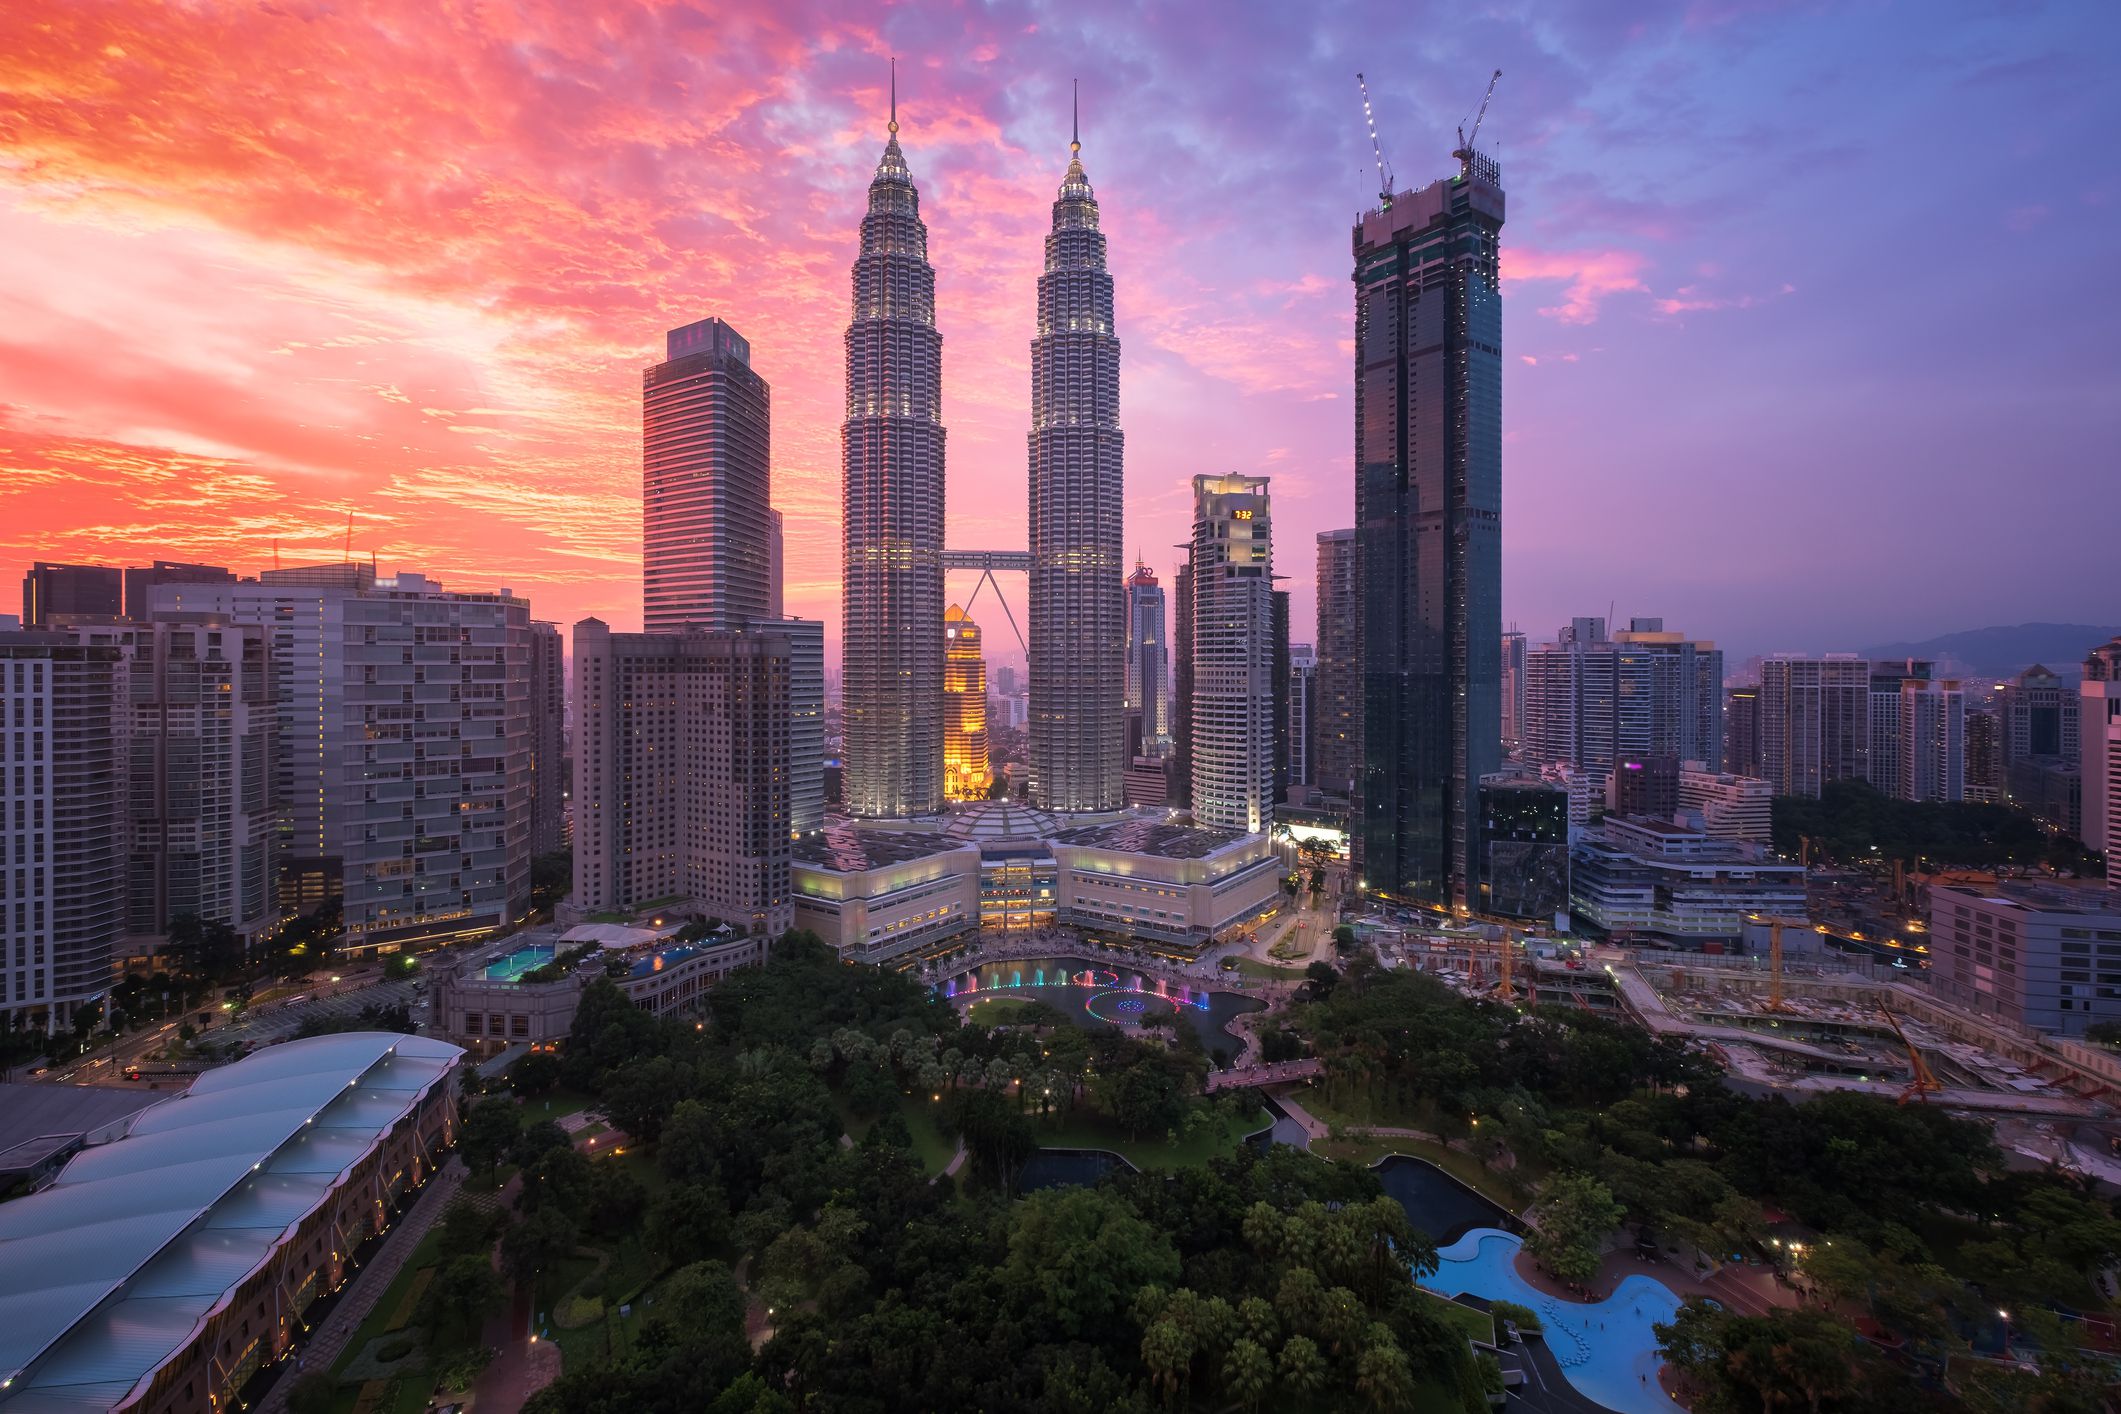 best time to visit malaysia from india